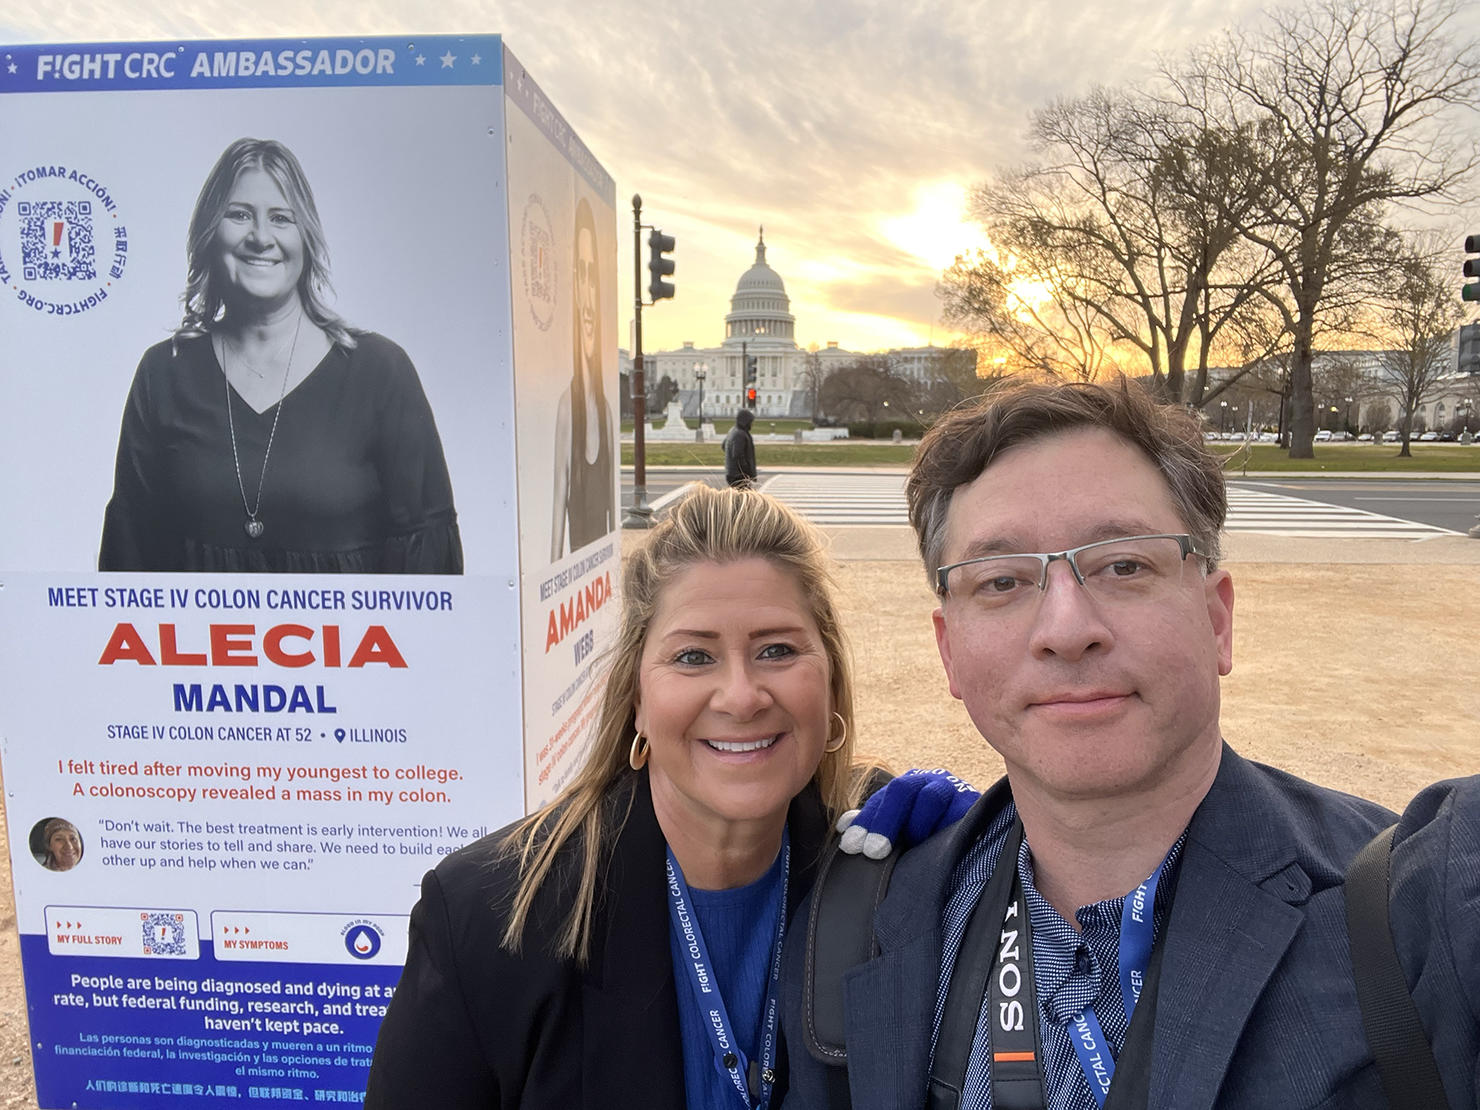 Evan Cantwell and a fellow volunteer on the National Mall in front of the photo exhibit for colorectal cancer awareness and the U.S. Capitol